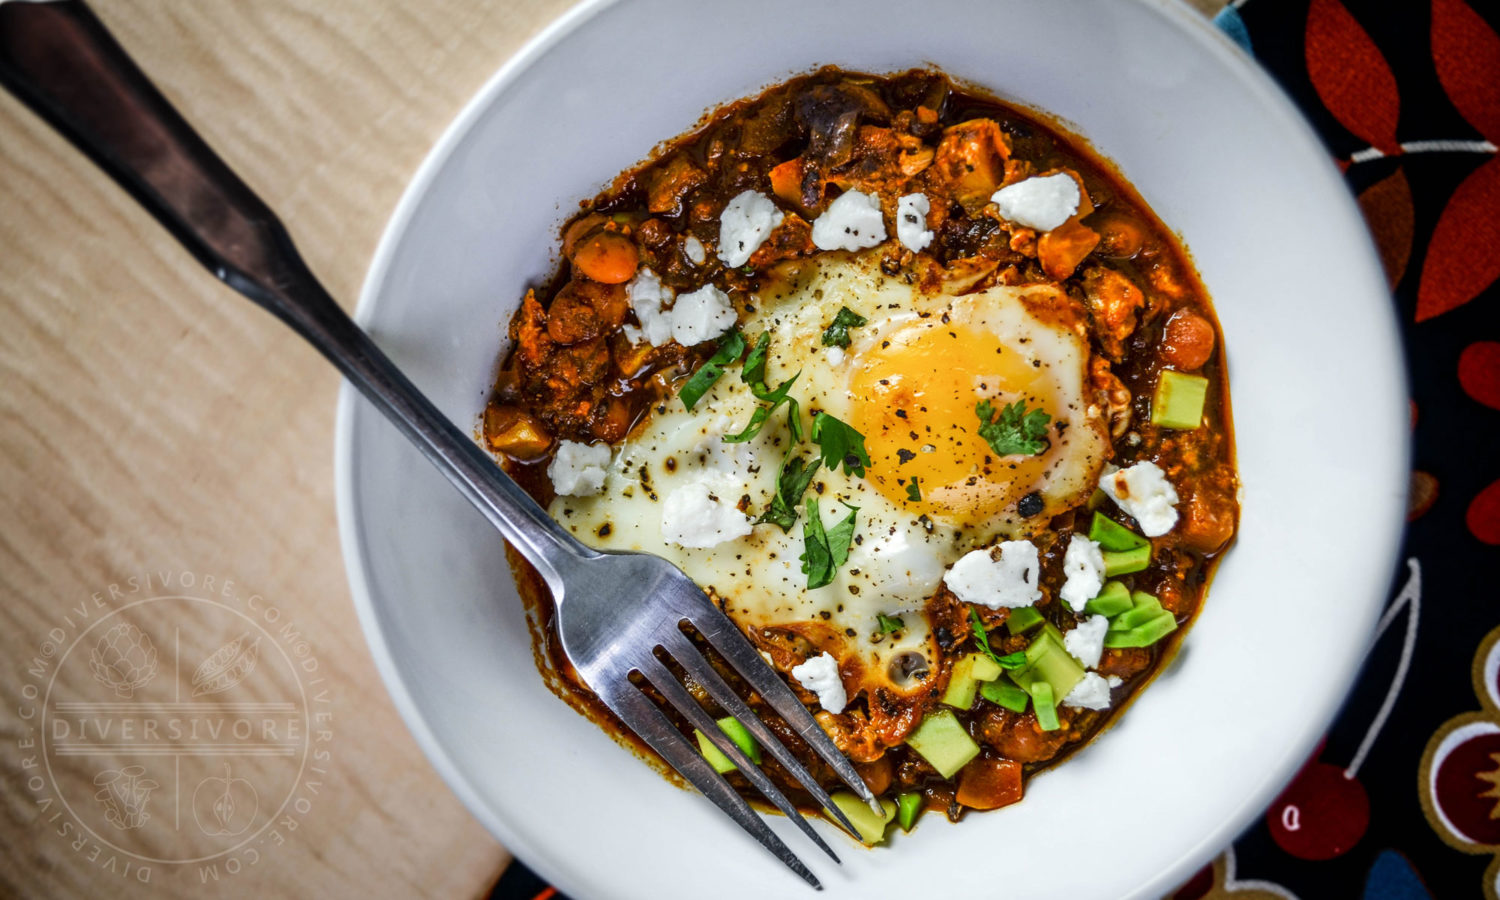 Shakshouka Rancheros - Eggs poached in a spiced tomato sauce, loaded with Mexican flavours and ingredients - Diversivore.com